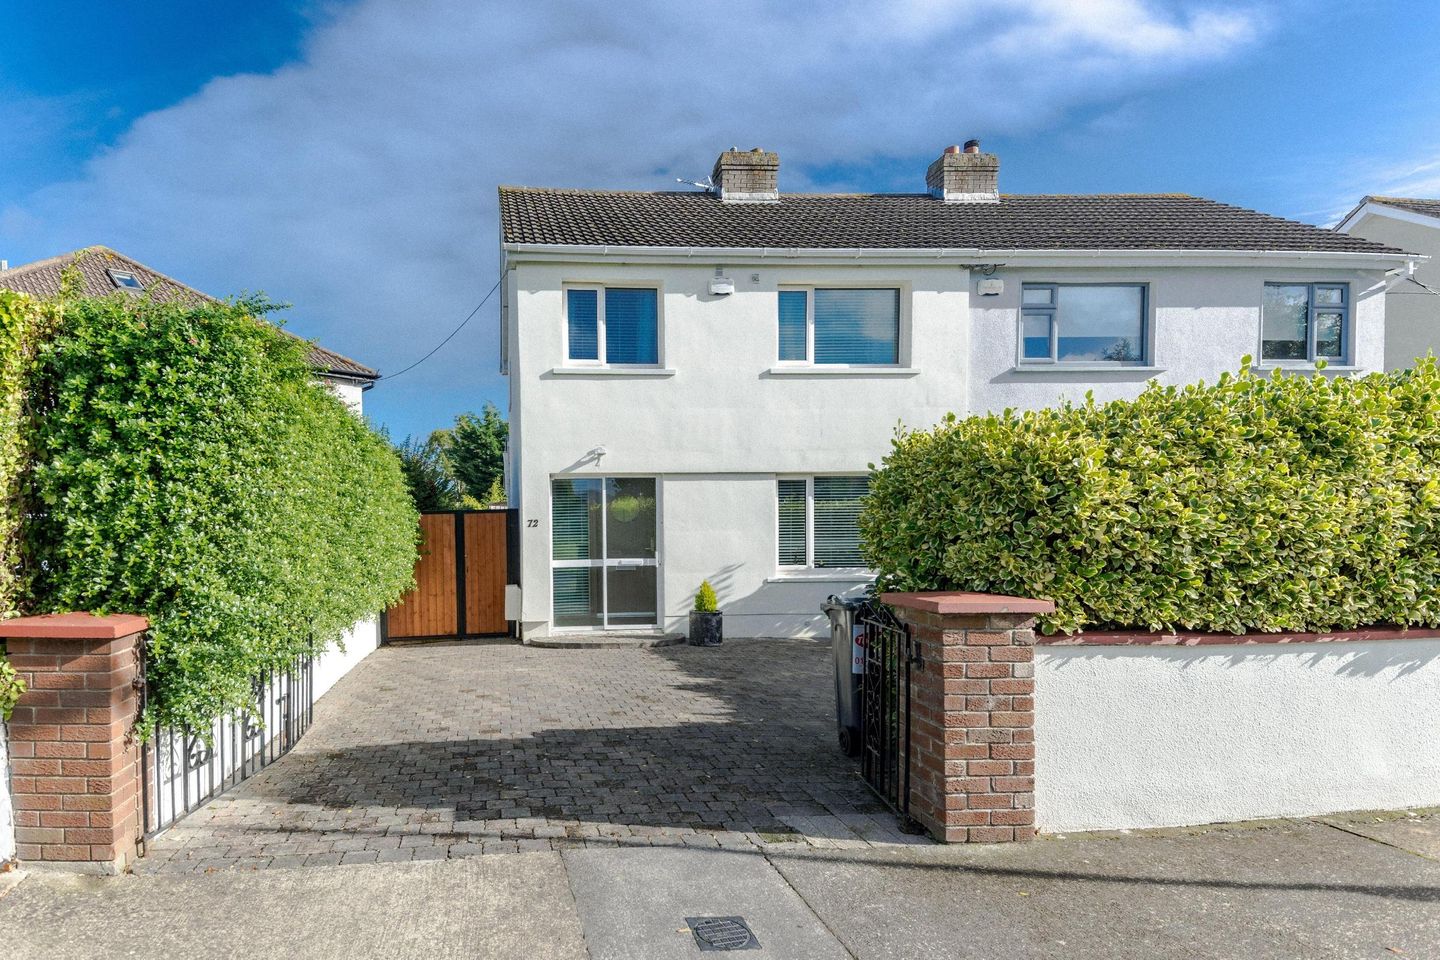 72 Ardmore Park, Bray, Co. Wicklow, A98W8N7